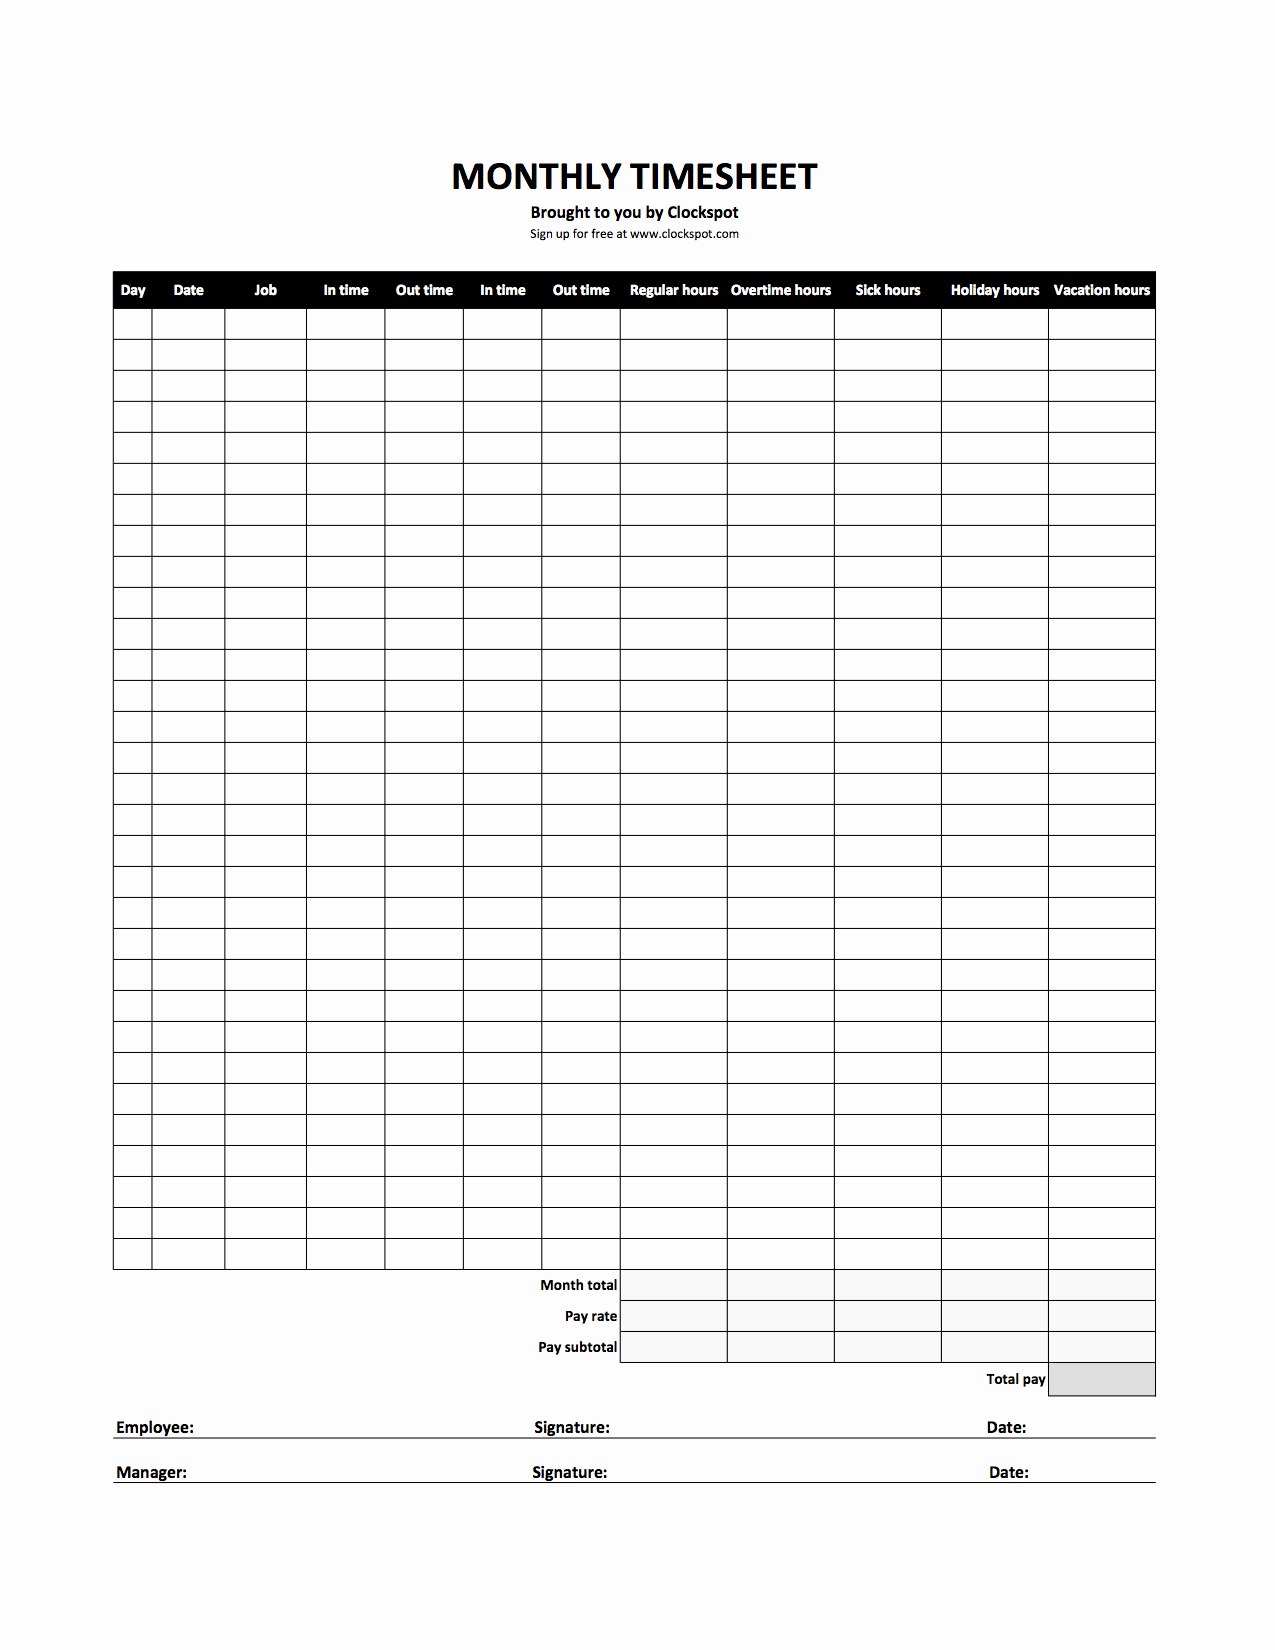 Time Tracking Excel Template Fresh Free Time Tracking Spreadsheets